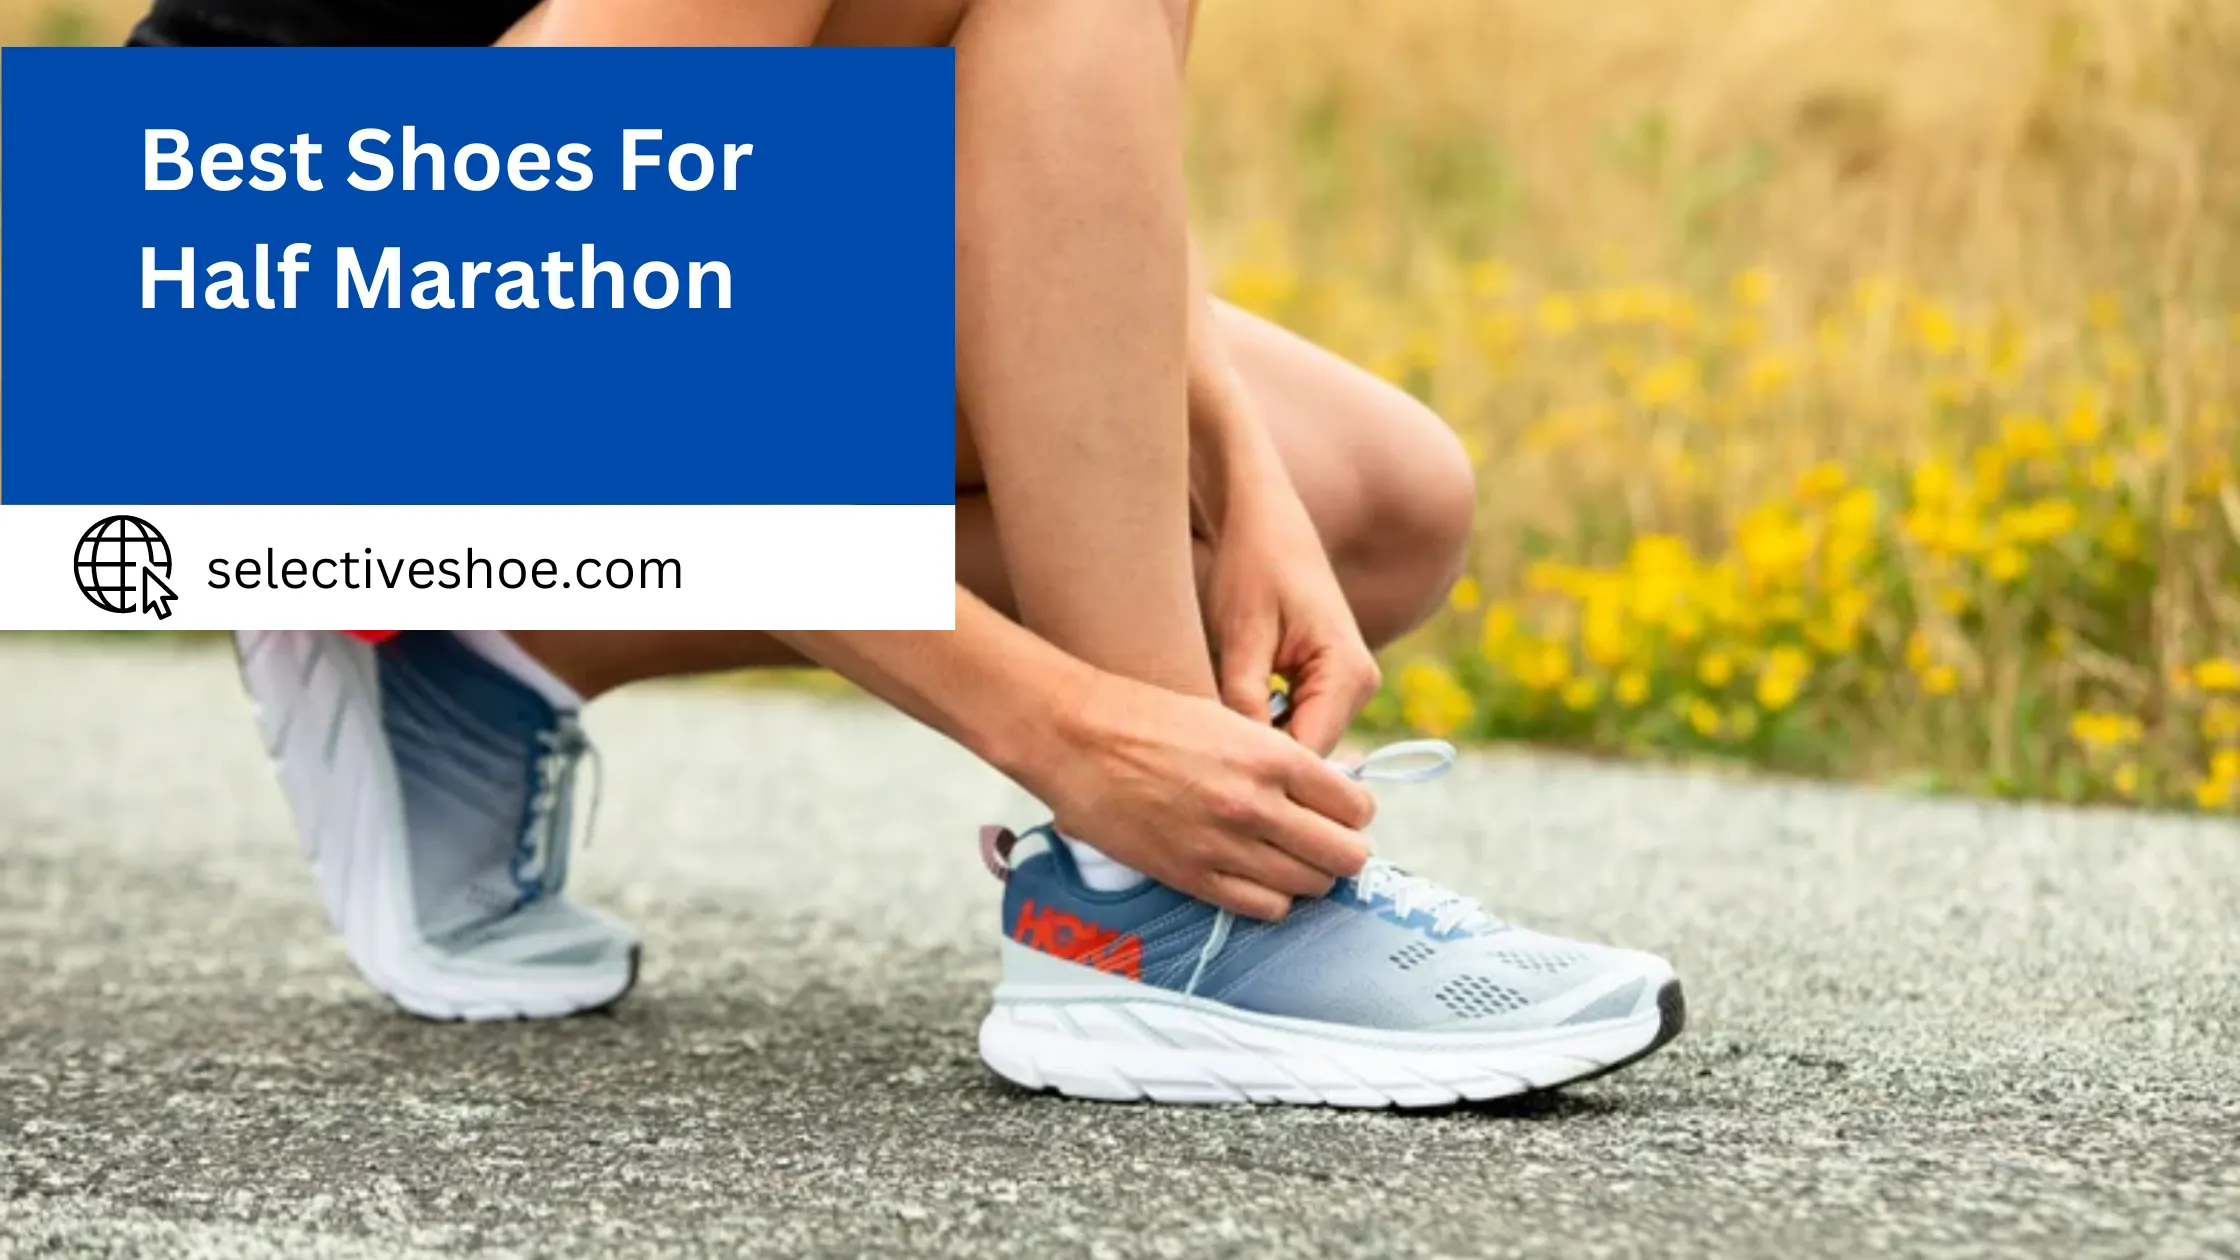 Best Shoes For Half Marathon - (An In-Depth Guide)